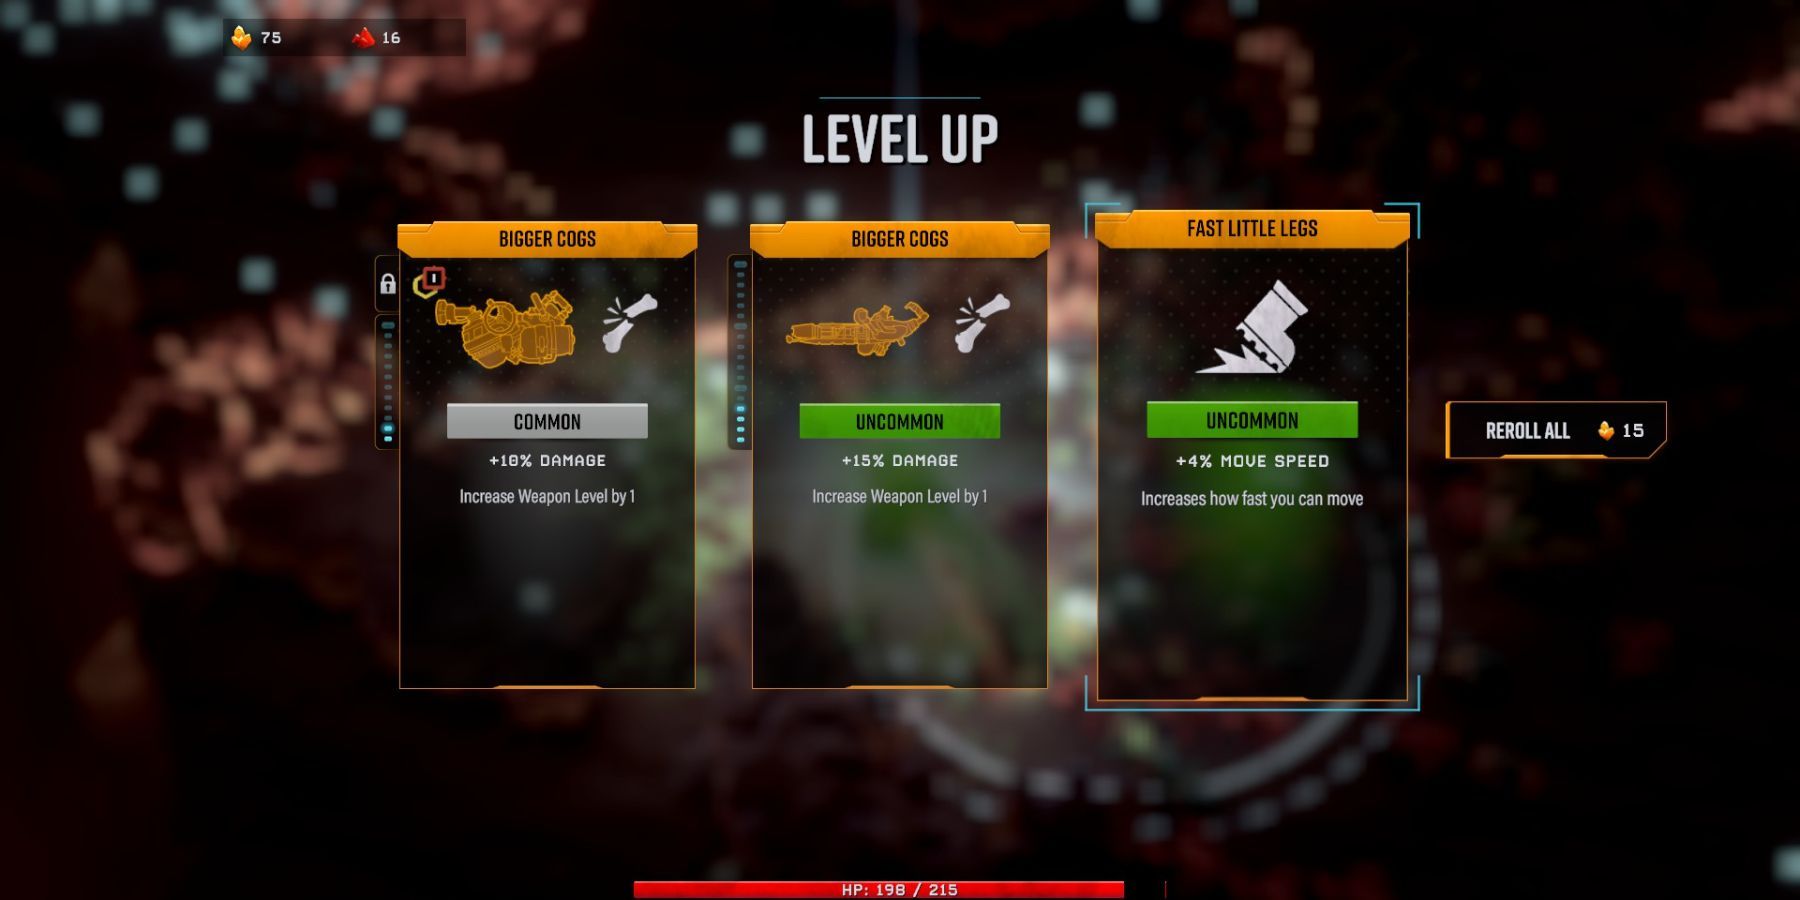 Movement Speed perk option after leveling up